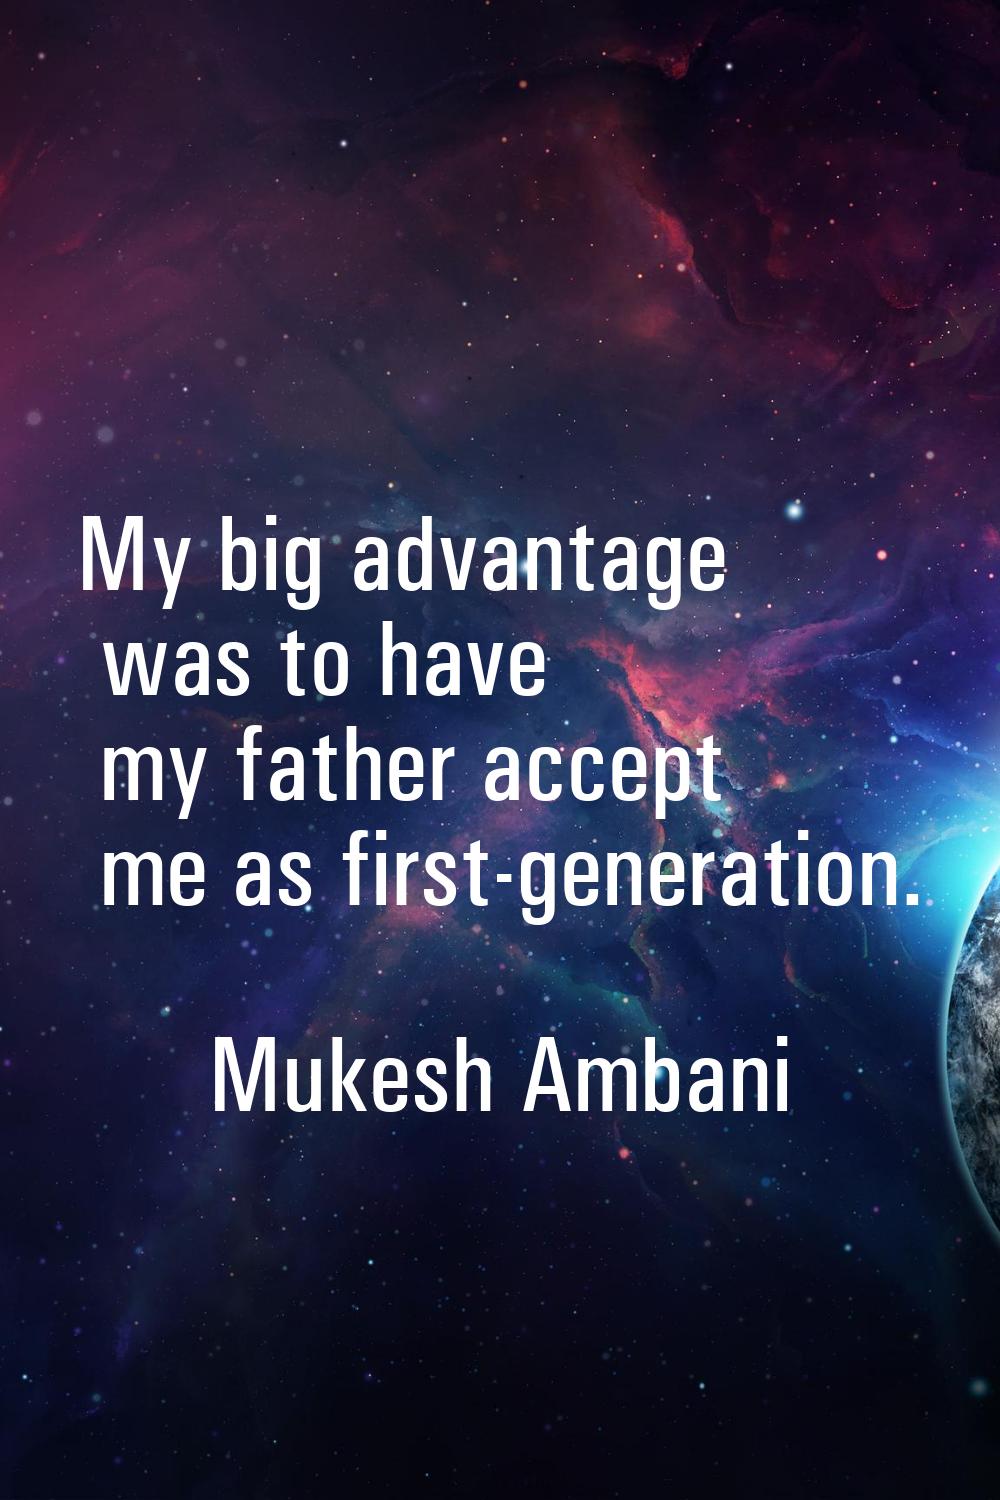 My big advantage was to have my father accept me as first-generation.